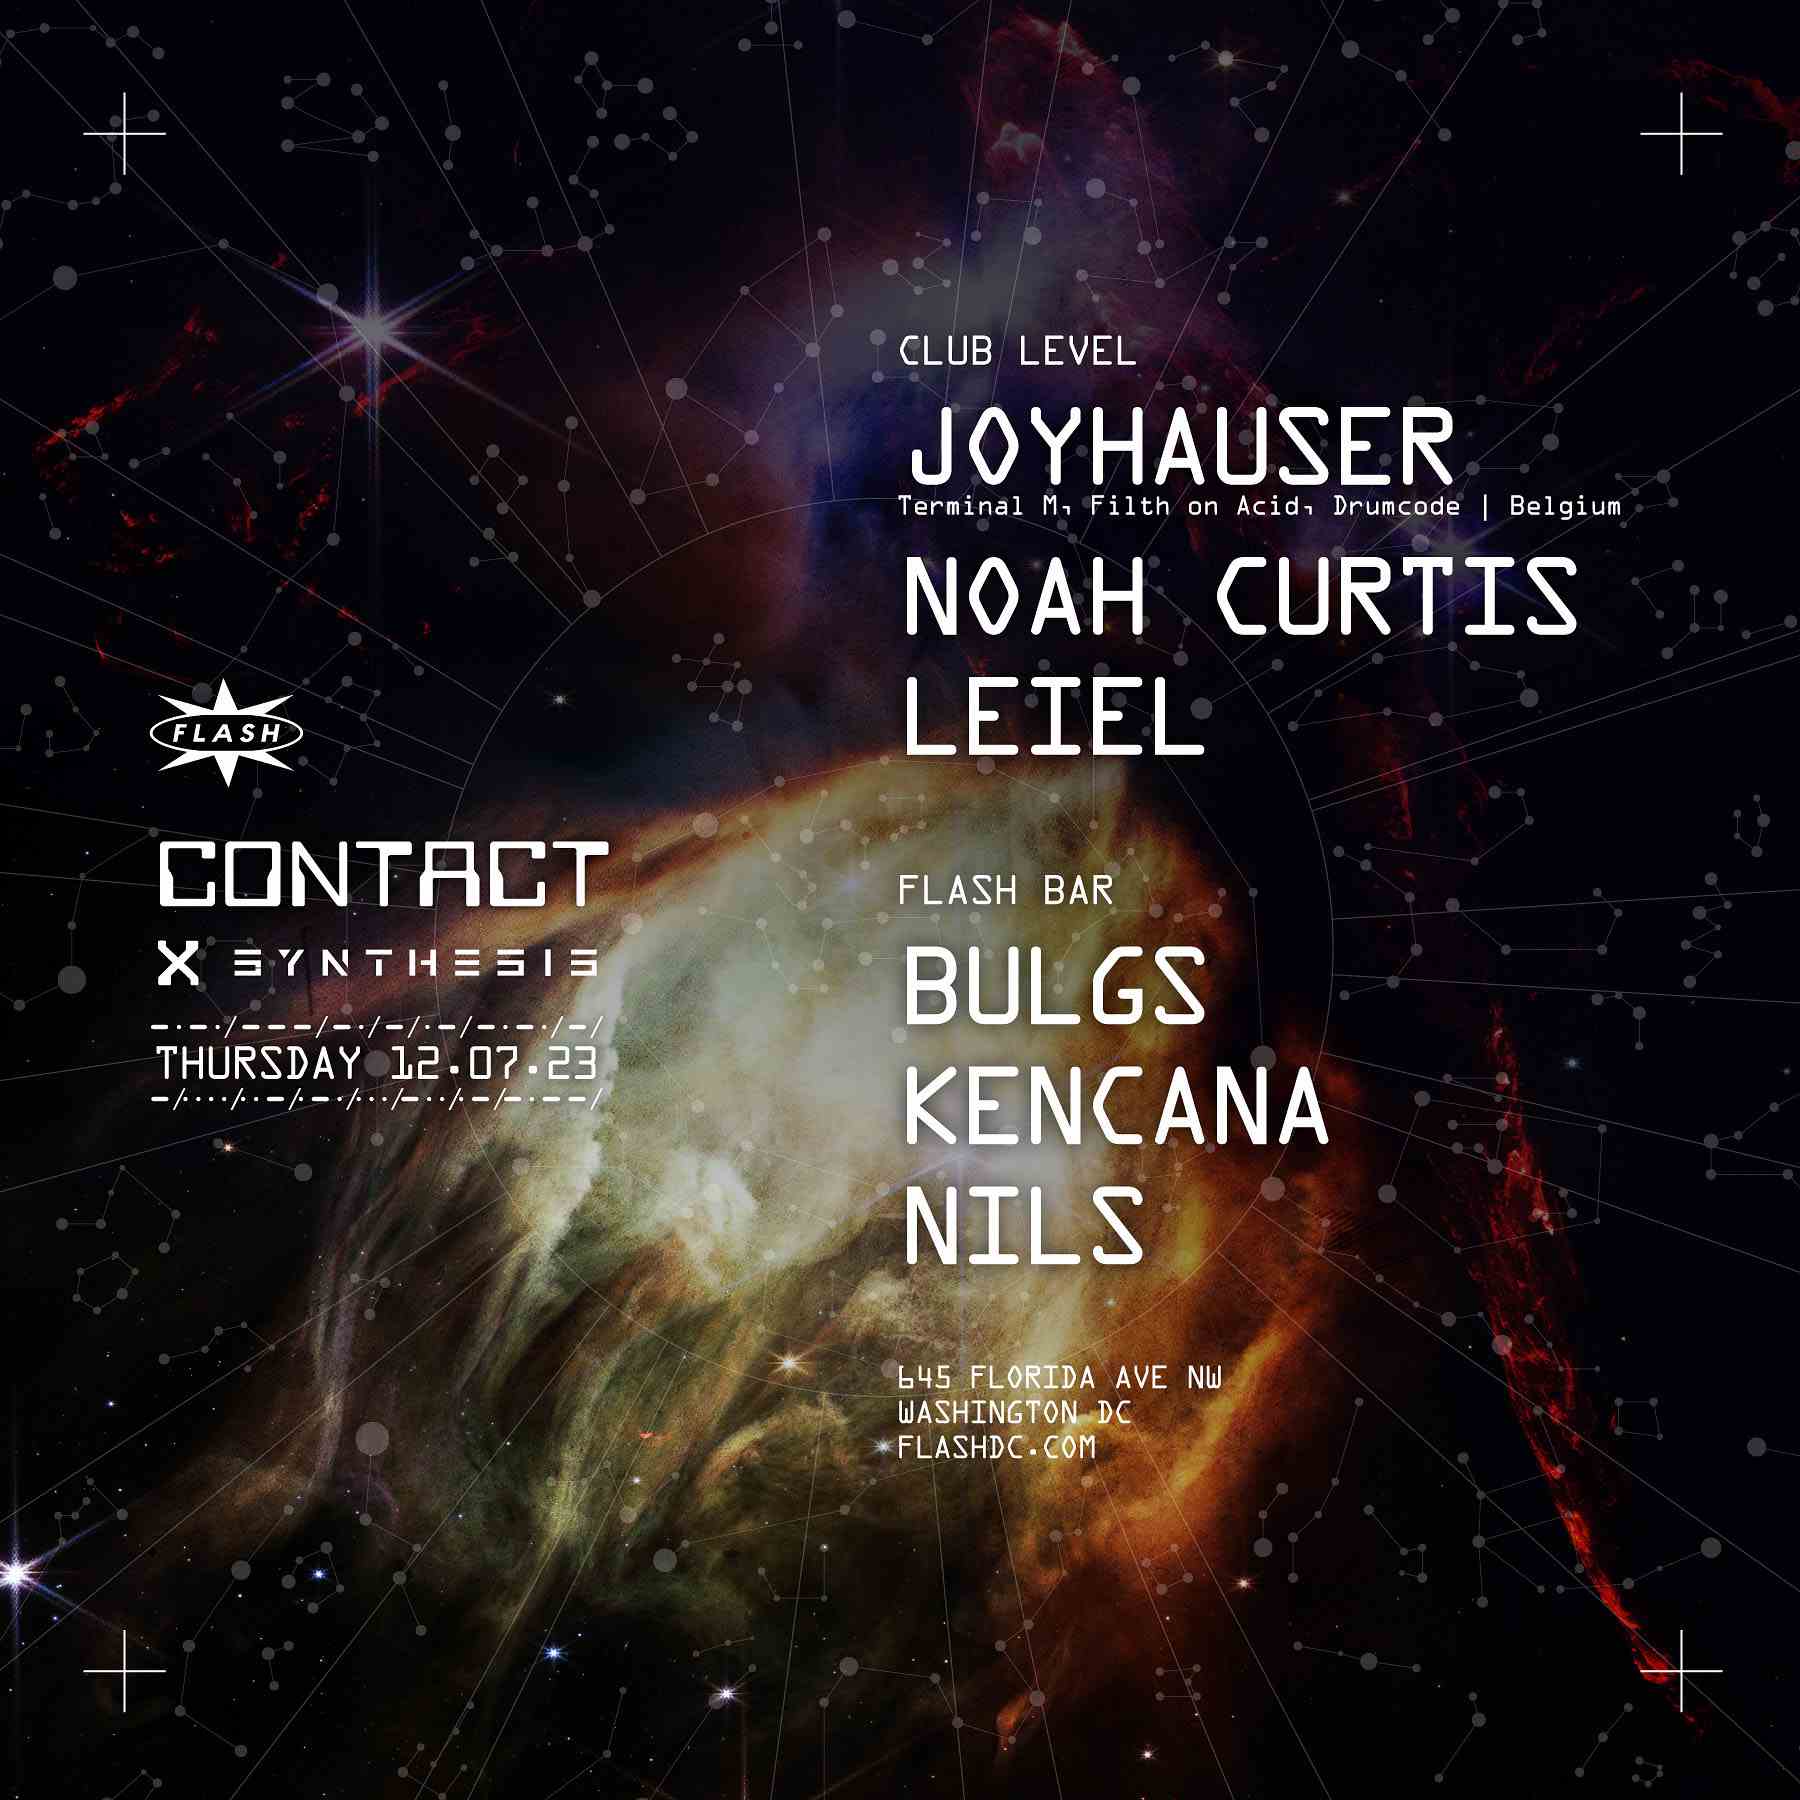 CONTACT x Synthesis: Joyhauser event flyer